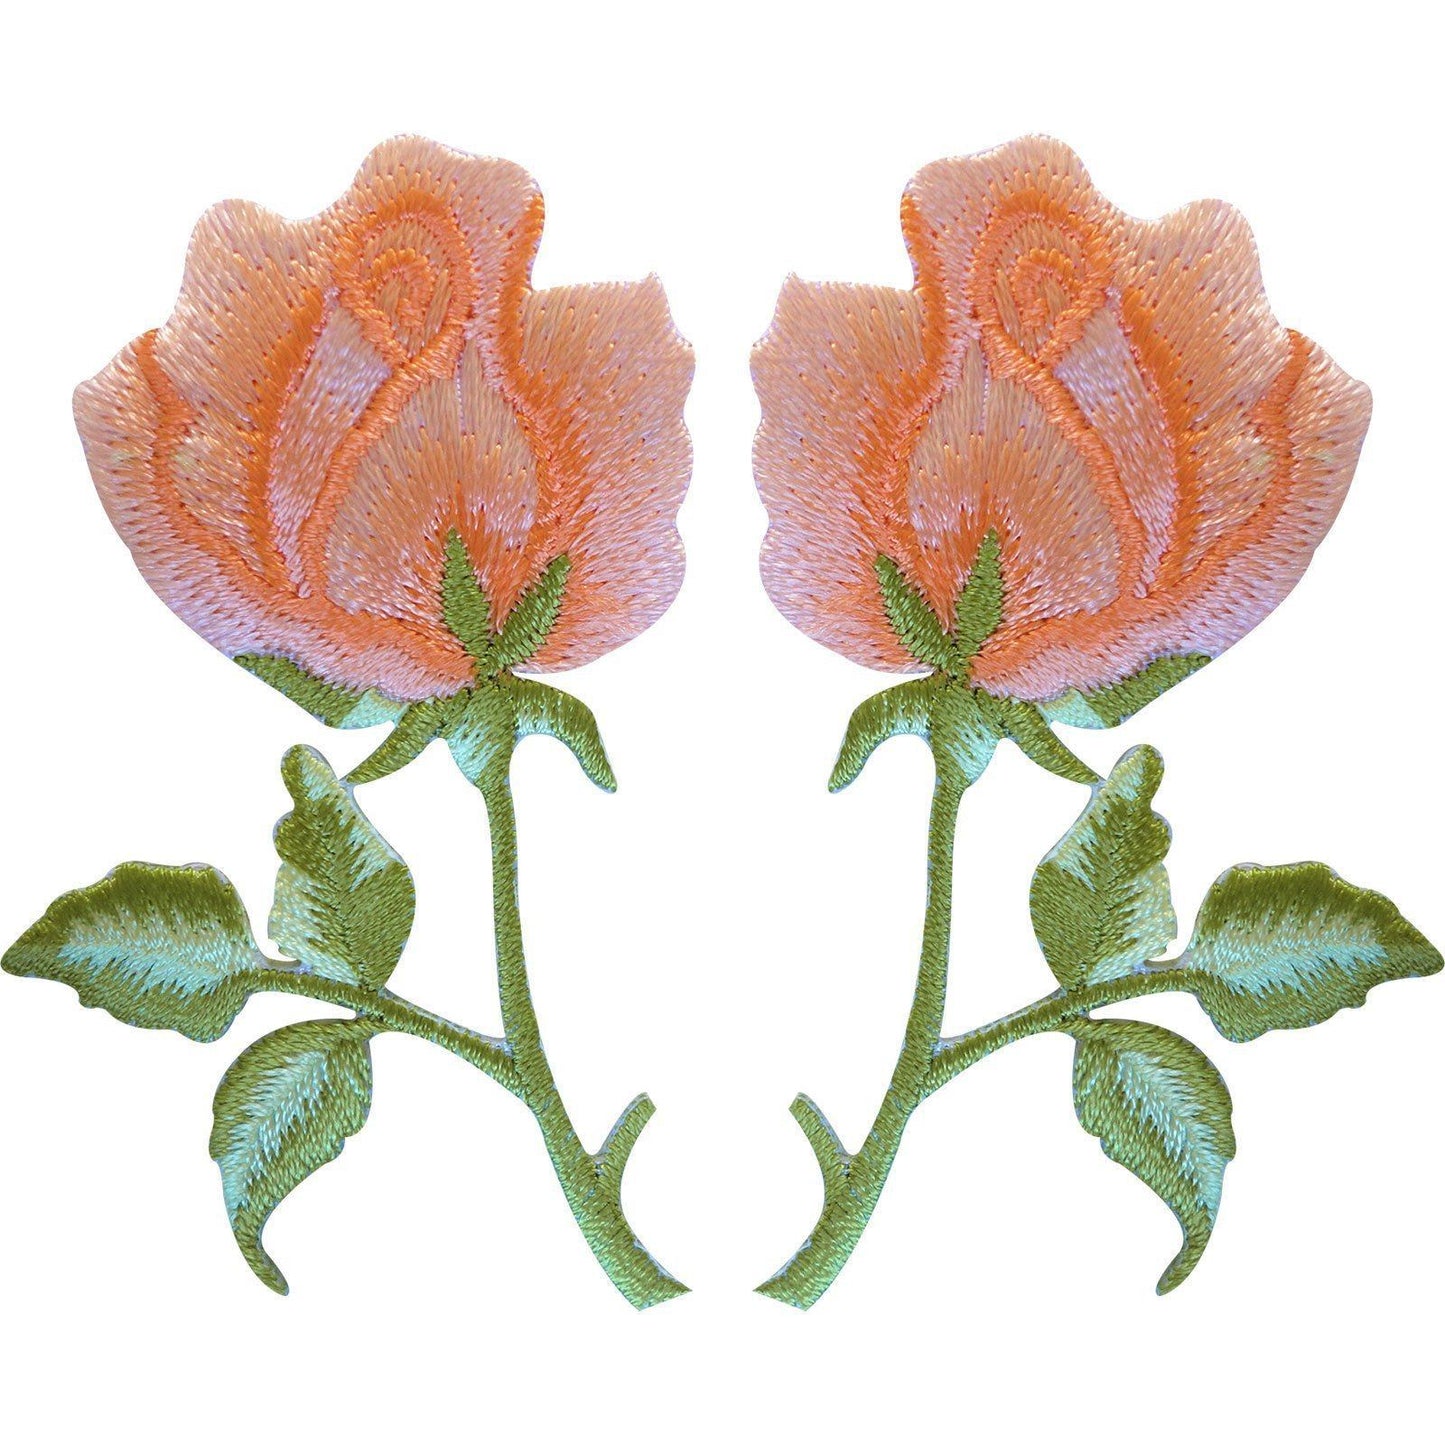 Pair of Apricot Peach Orange Roses Patches Iron Sew On Rose Flower Clothes Patch